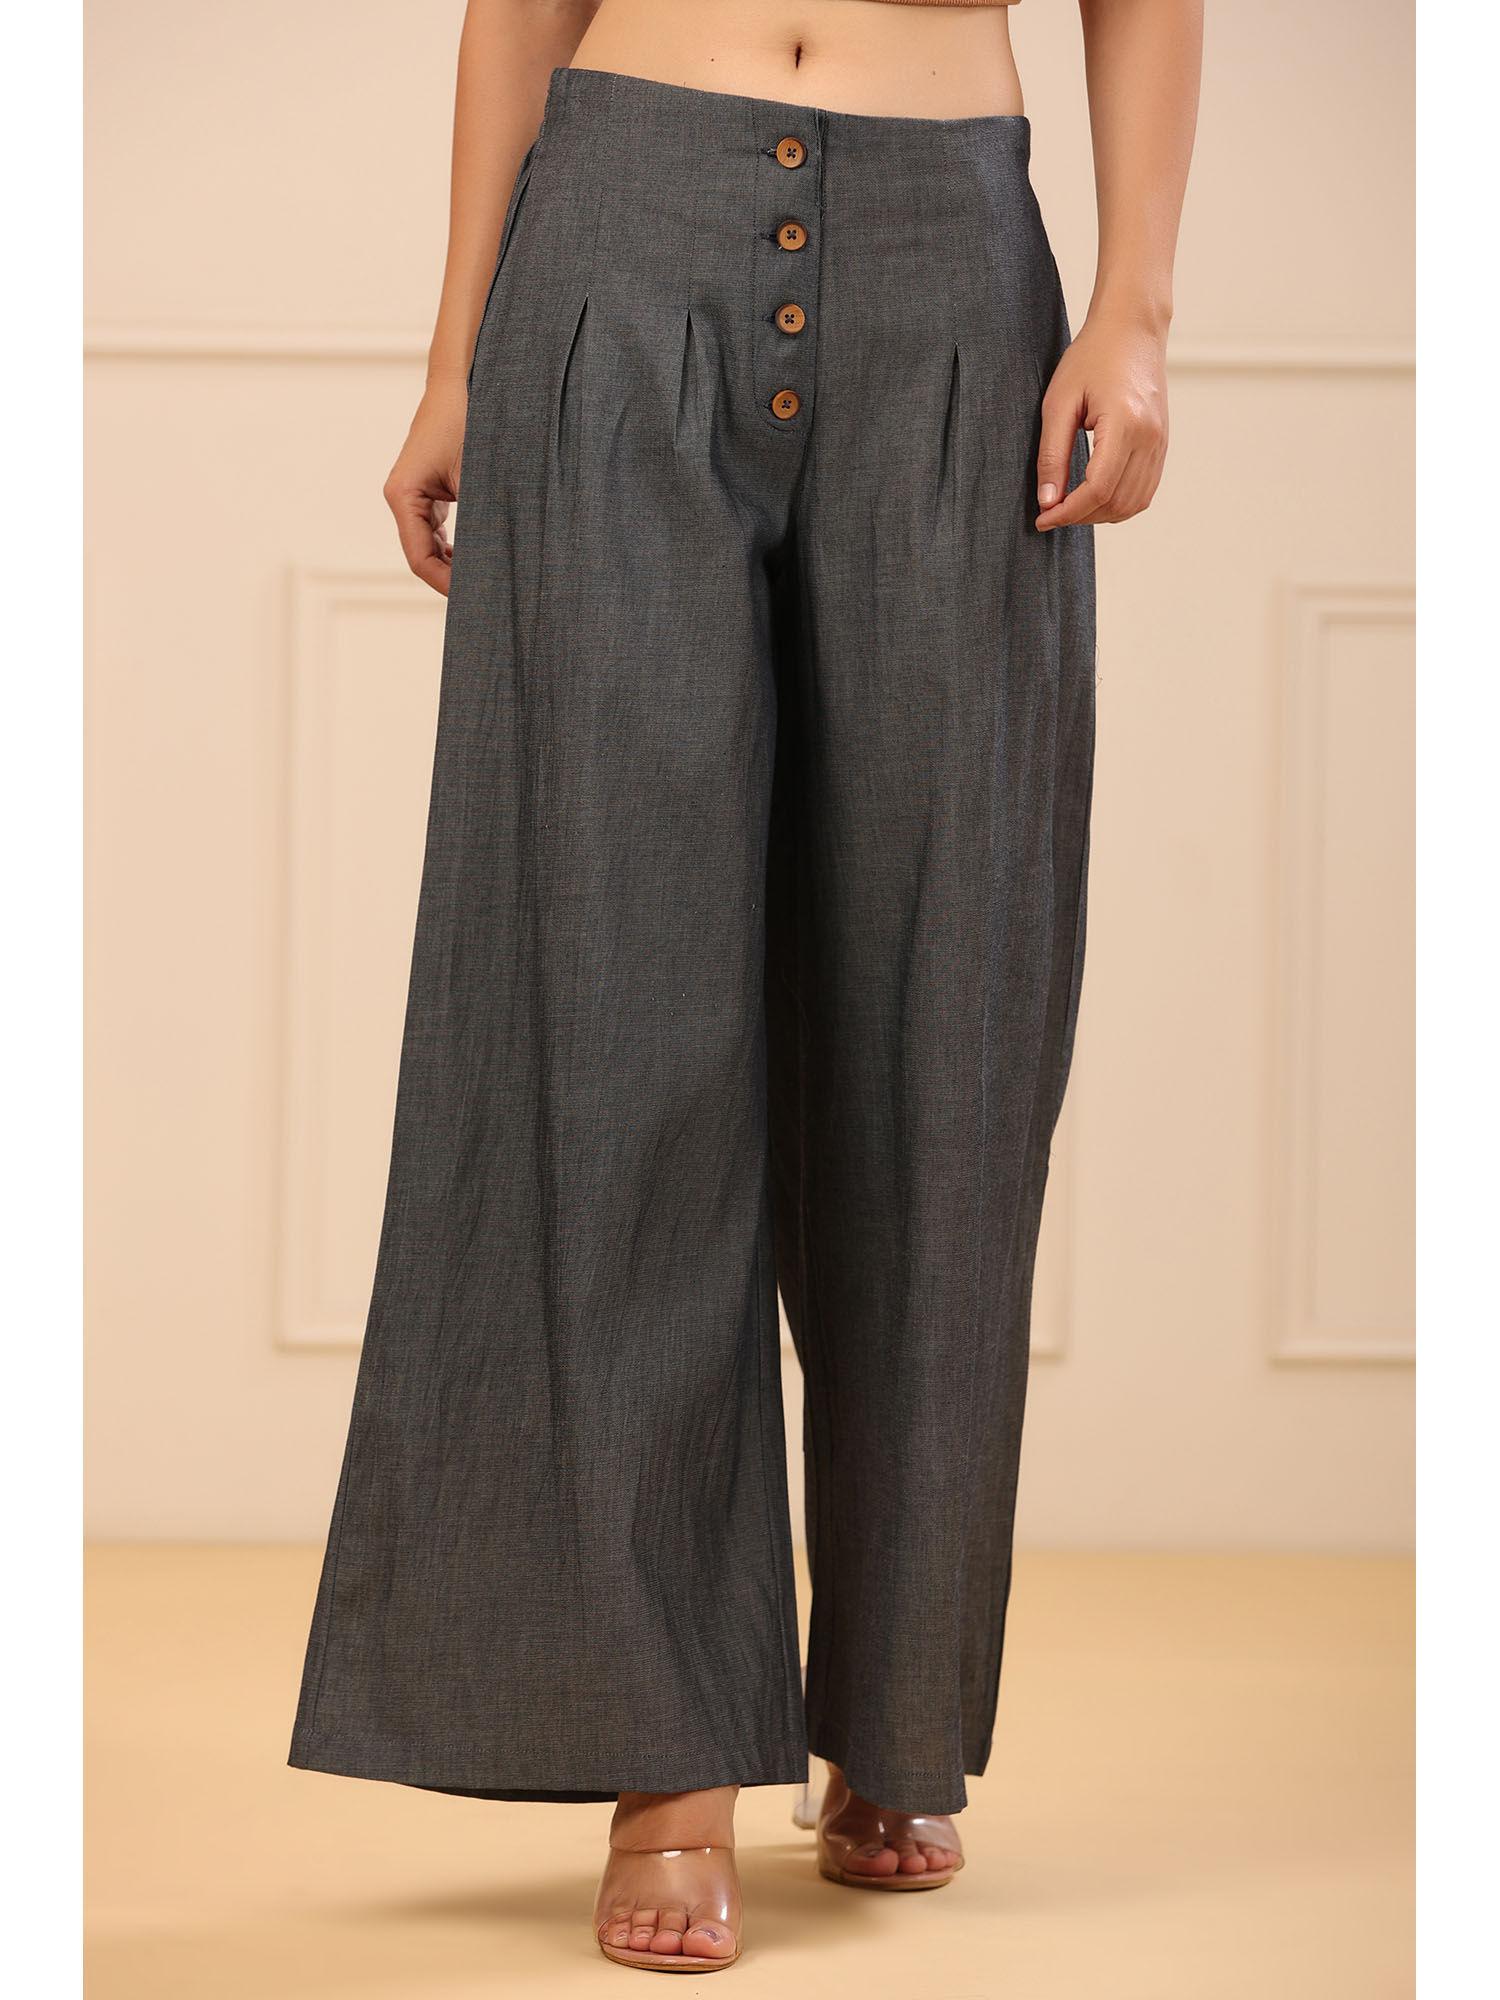 grey solid denim flared palazzos with a button closure & partially elasticated waistband